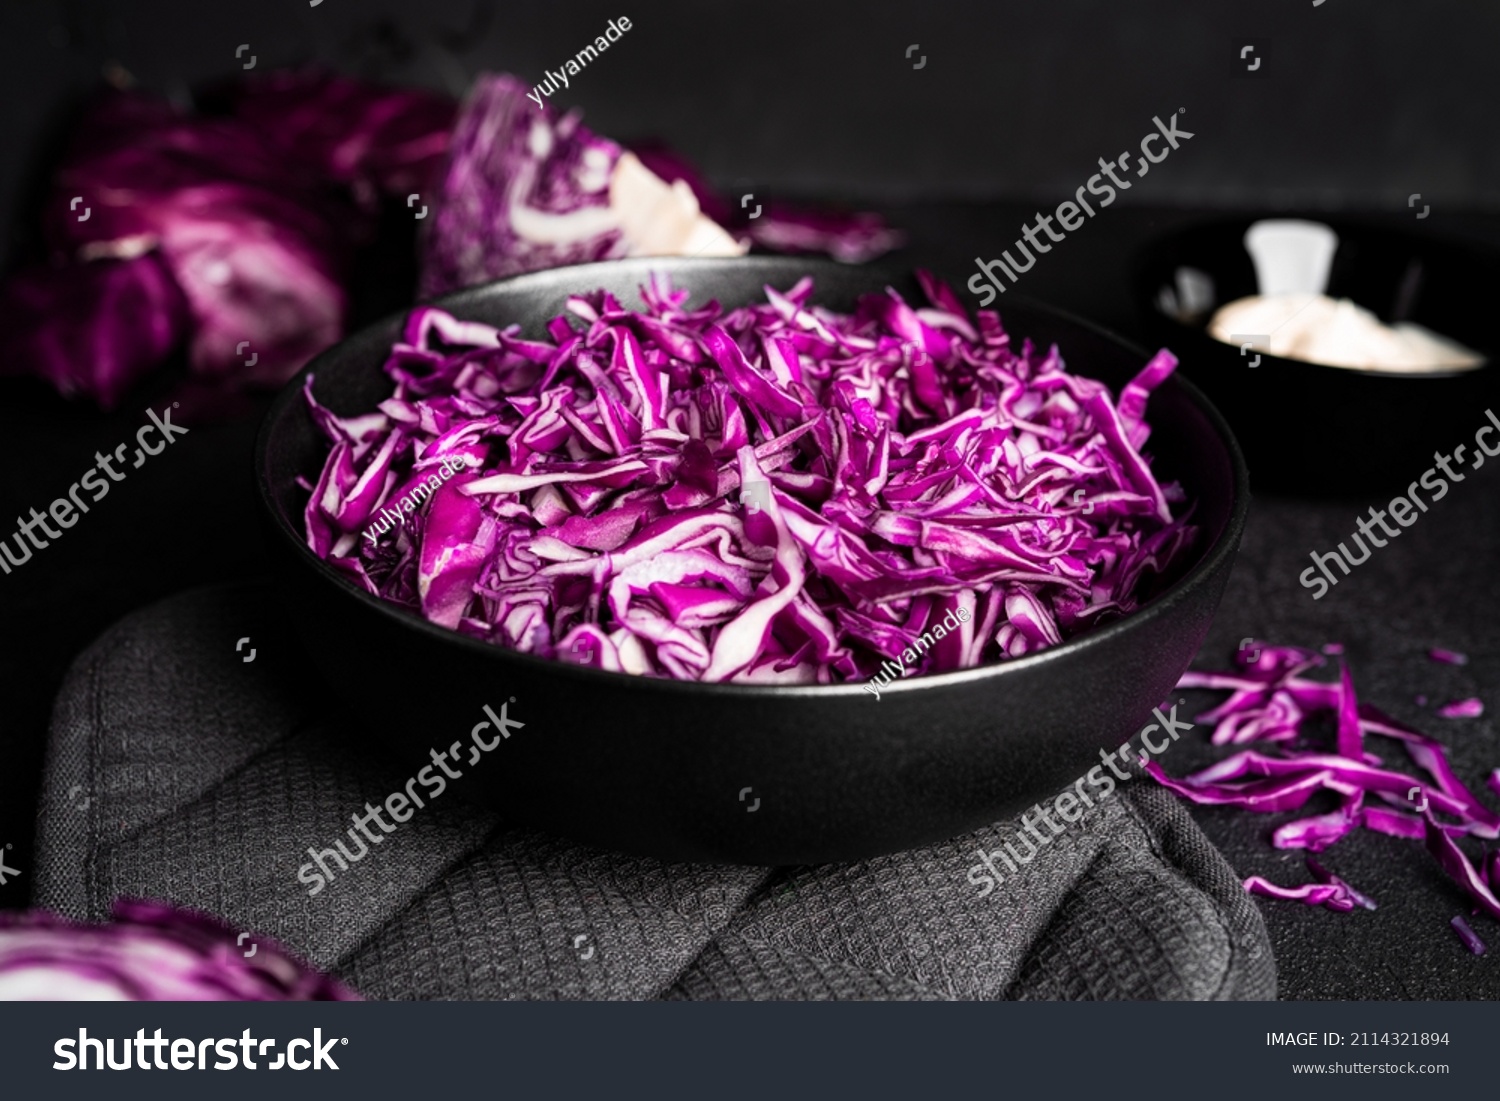 Red cabbage on a dark background. Kohlrabi red cabbage salad with homemade mayonnaise. High quality photo #2114321894